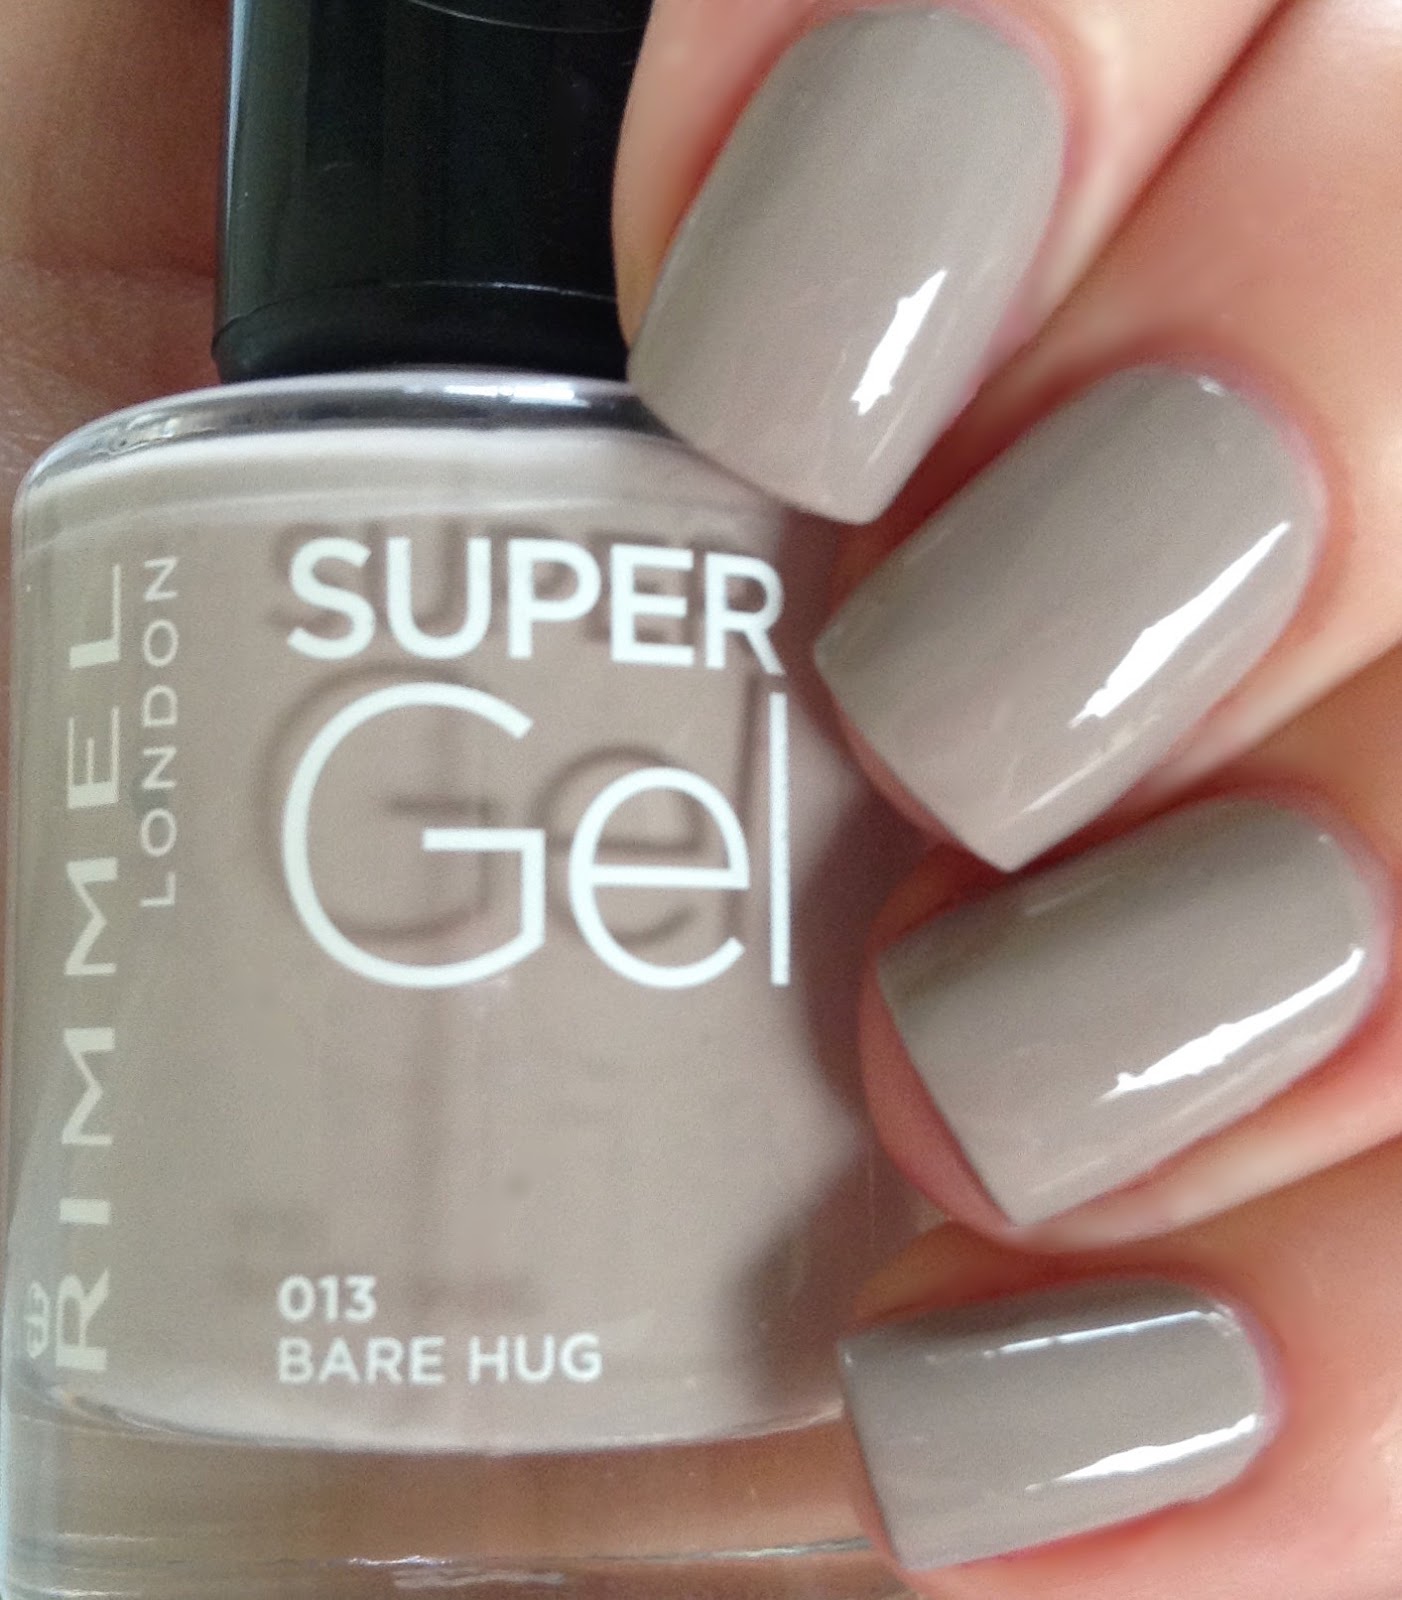 Don's Nail OBSESSION!: RIMMEL LONDON NEW SUPER GEL RANGE - SWATCHES & REVIEW